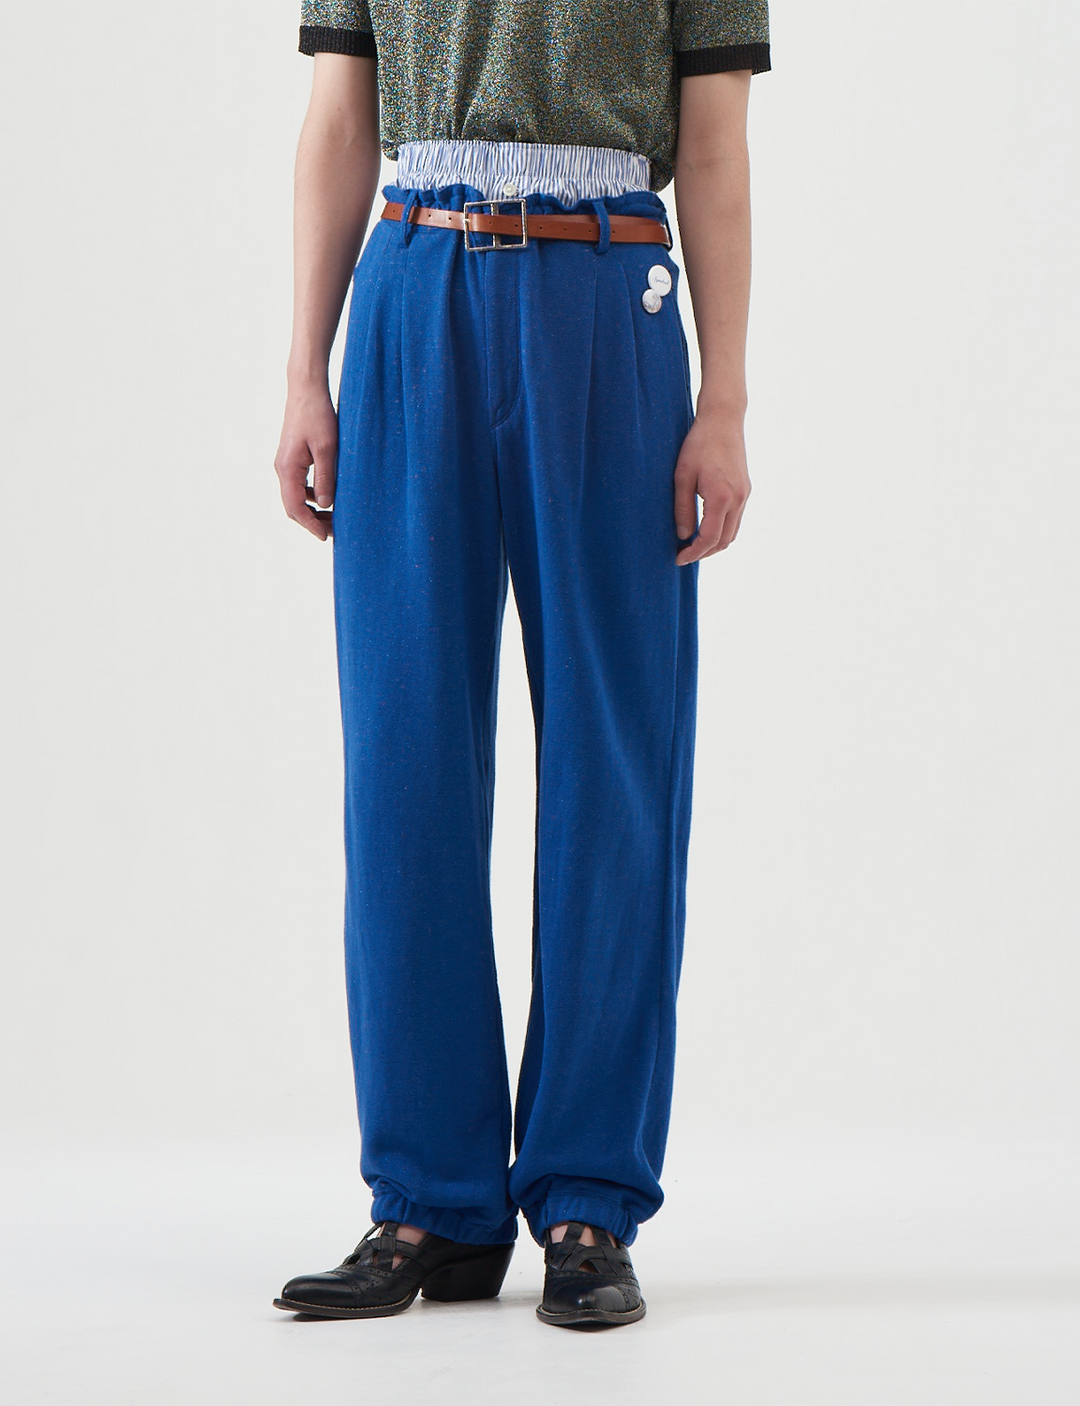 BED jw FORD - Double-Waist Sweat Pants – Blue – The Contemporary 